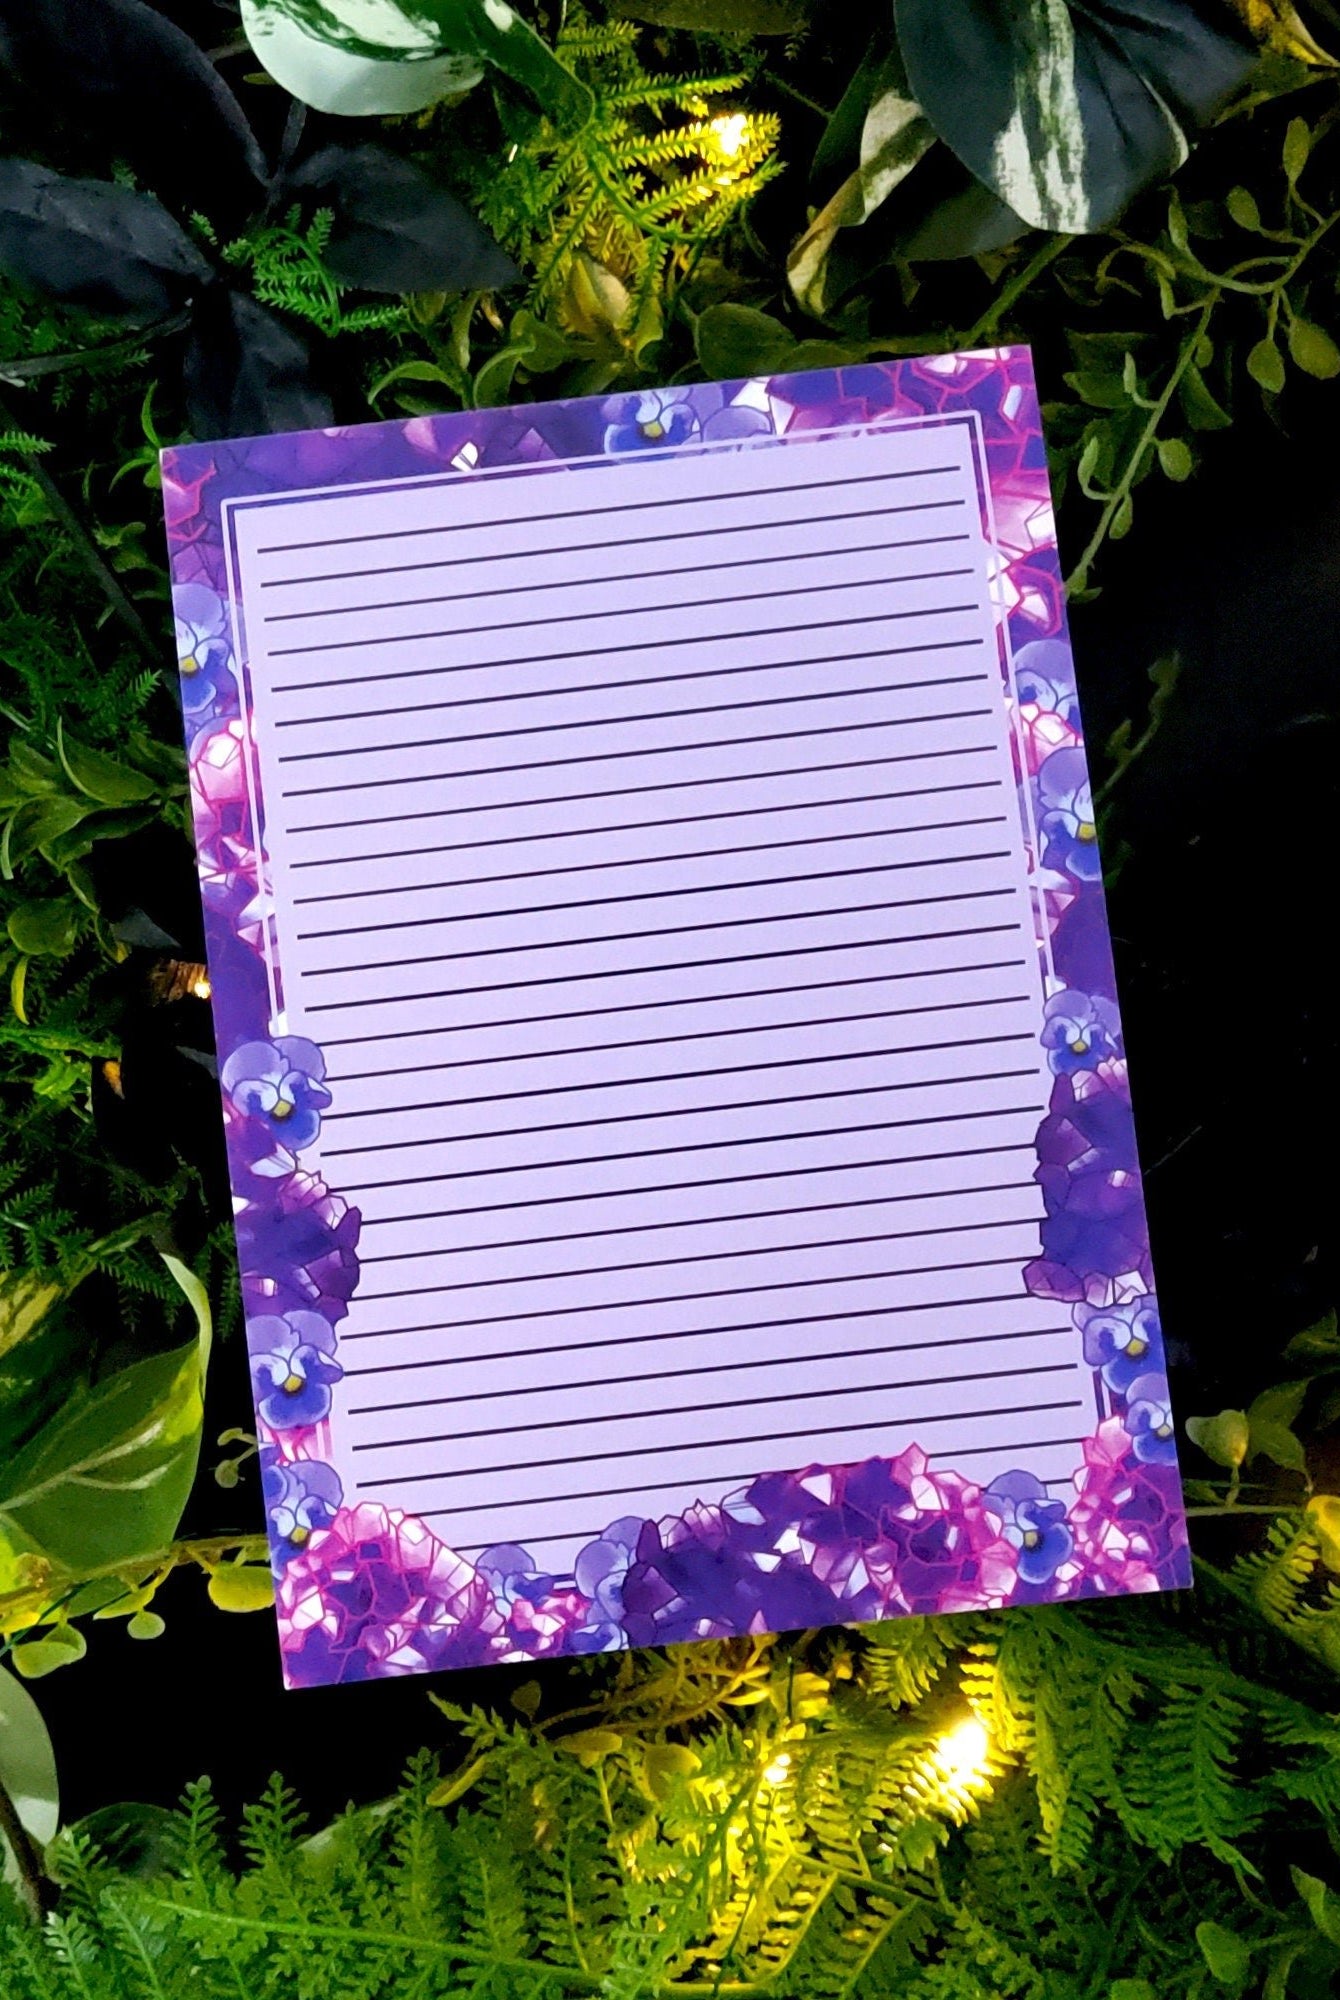 NOTEPAD: Amethyst Crystal To Do List , Purple Crystal Notepad , Amethyst Crystal To Do Notepad , Amethyst Crystal Stationary , Amethyst Note